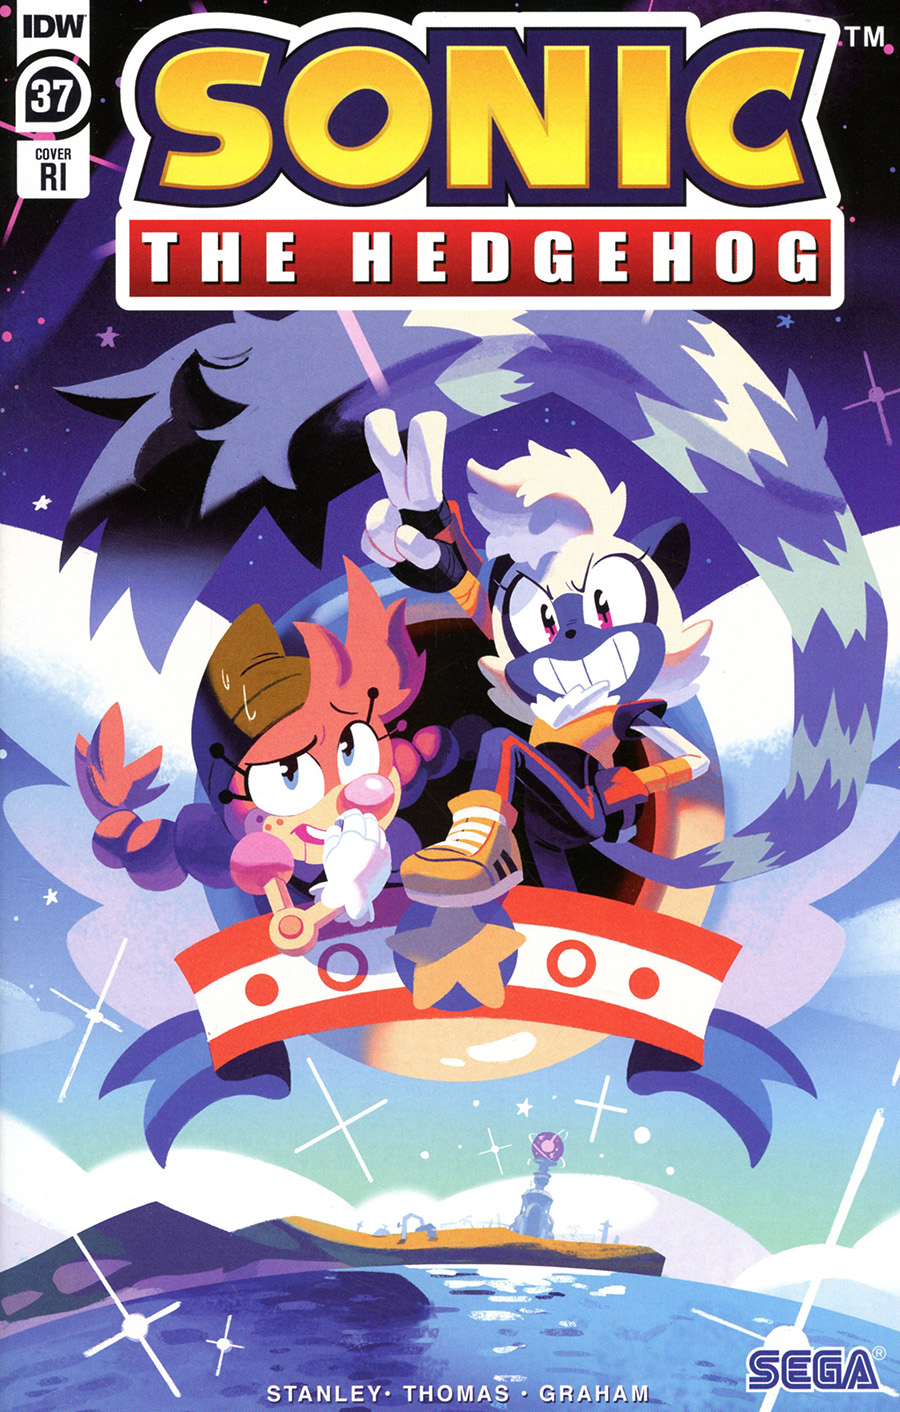 Sonic The Hedgehog Vol 3 #37 Cover C Incentive Nathalie Fourdraine Variant Cover